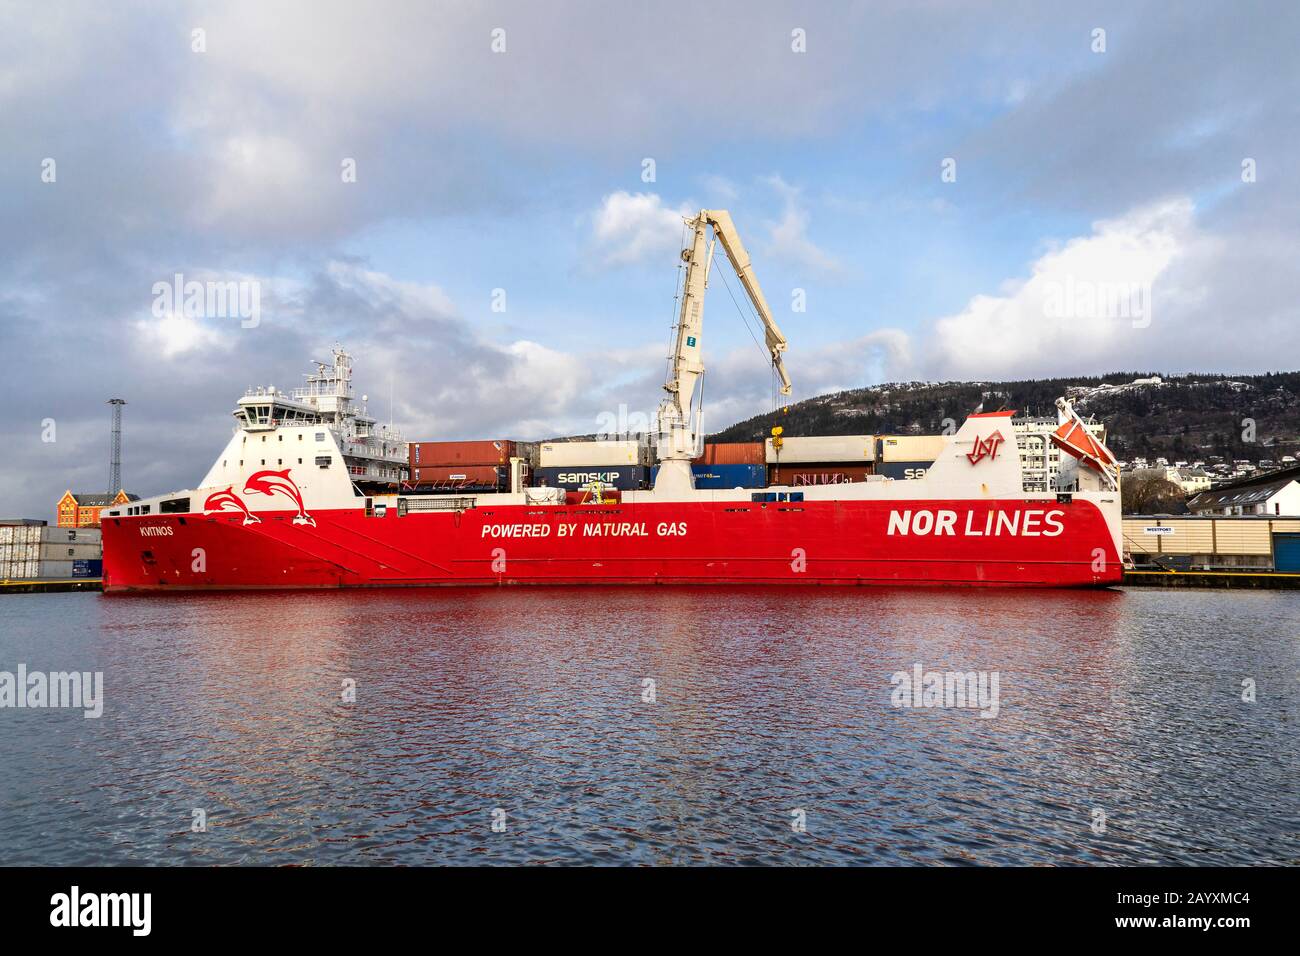 Ro-ro, general cargo and container vessel Kvitnos at work at Frieleneskaien quay in the port of Bergen, Norway.  The vessel is powered by natural gas. Stock Photo